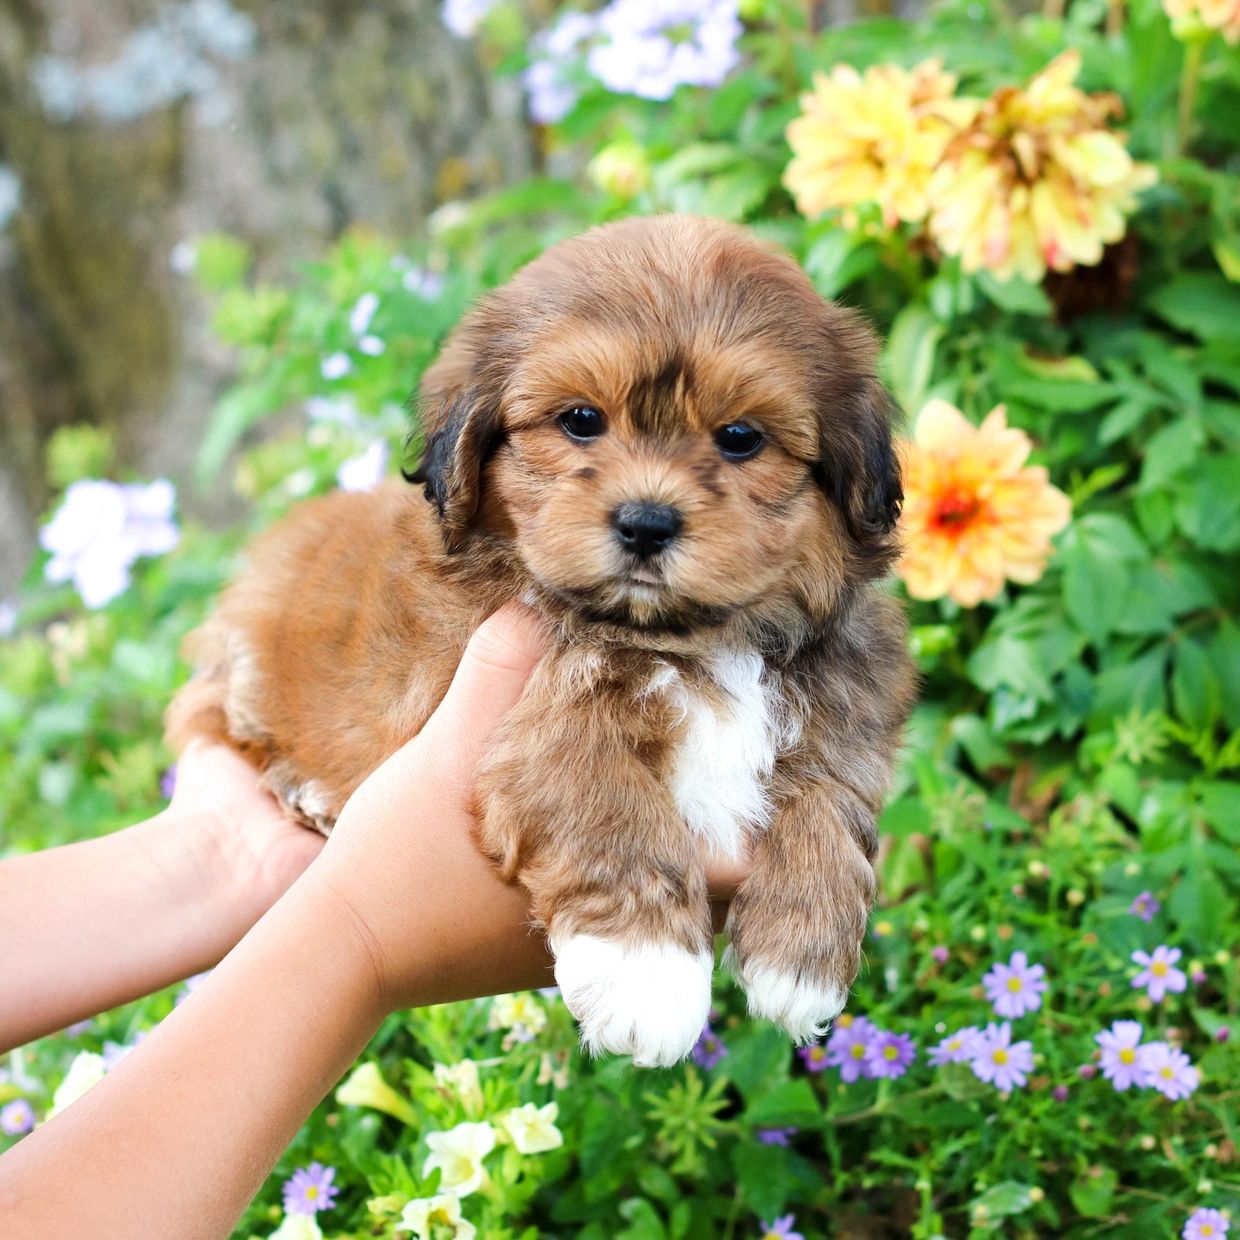 Teddy bear puppies for sale, Shichon, Shichon puppies, Shichon puppies for sale, Shihtzu bichon mix